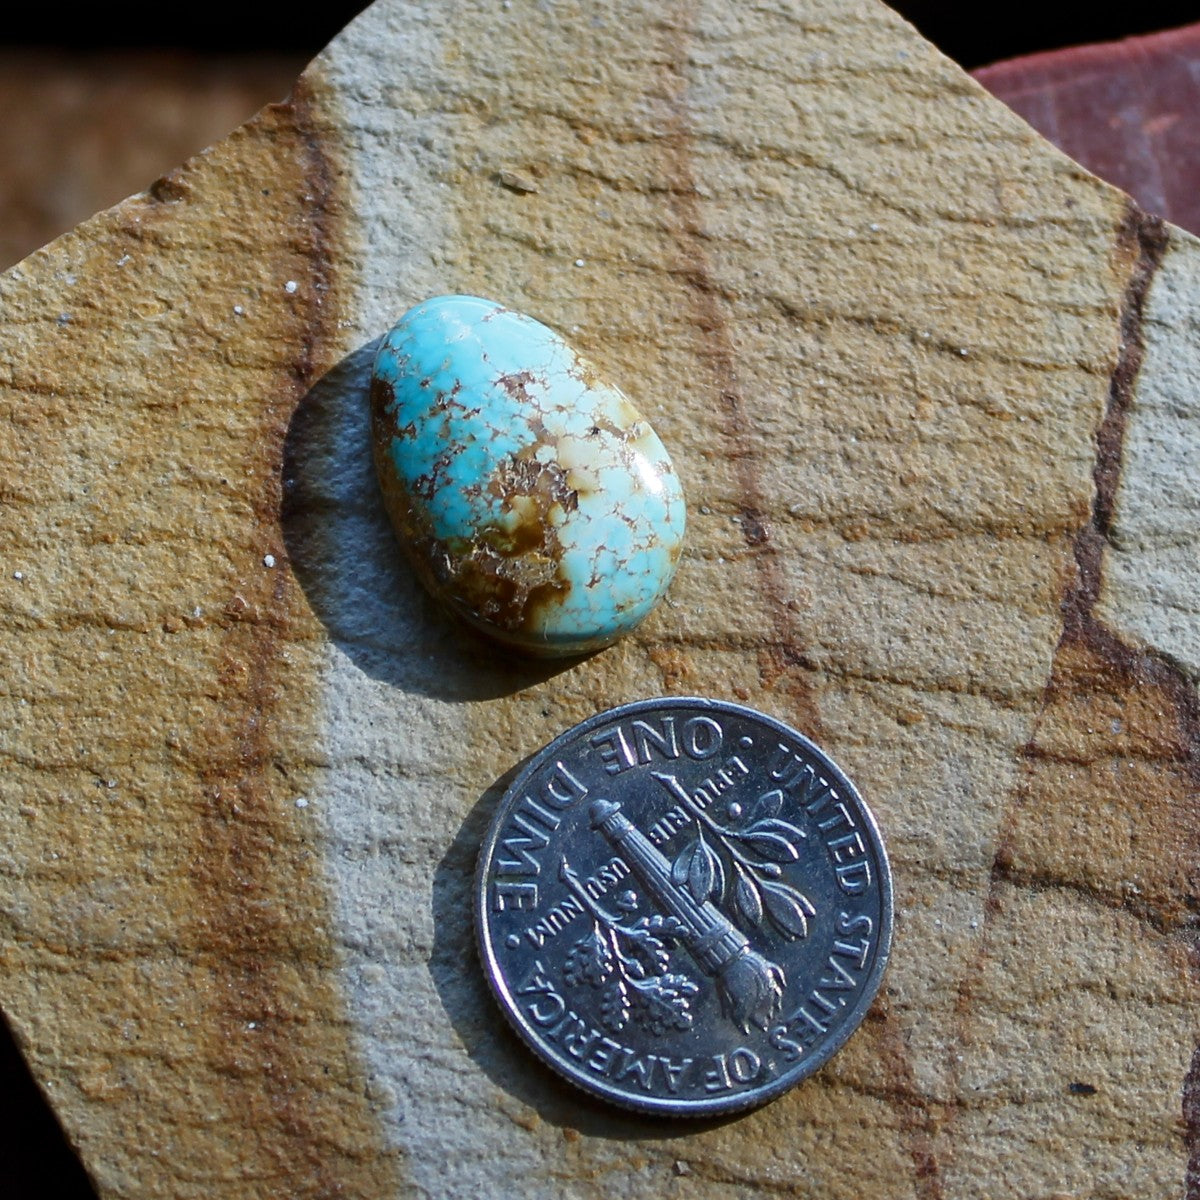 6.5 carats blue Stone Mountain Turquoise cabochon with red matrix